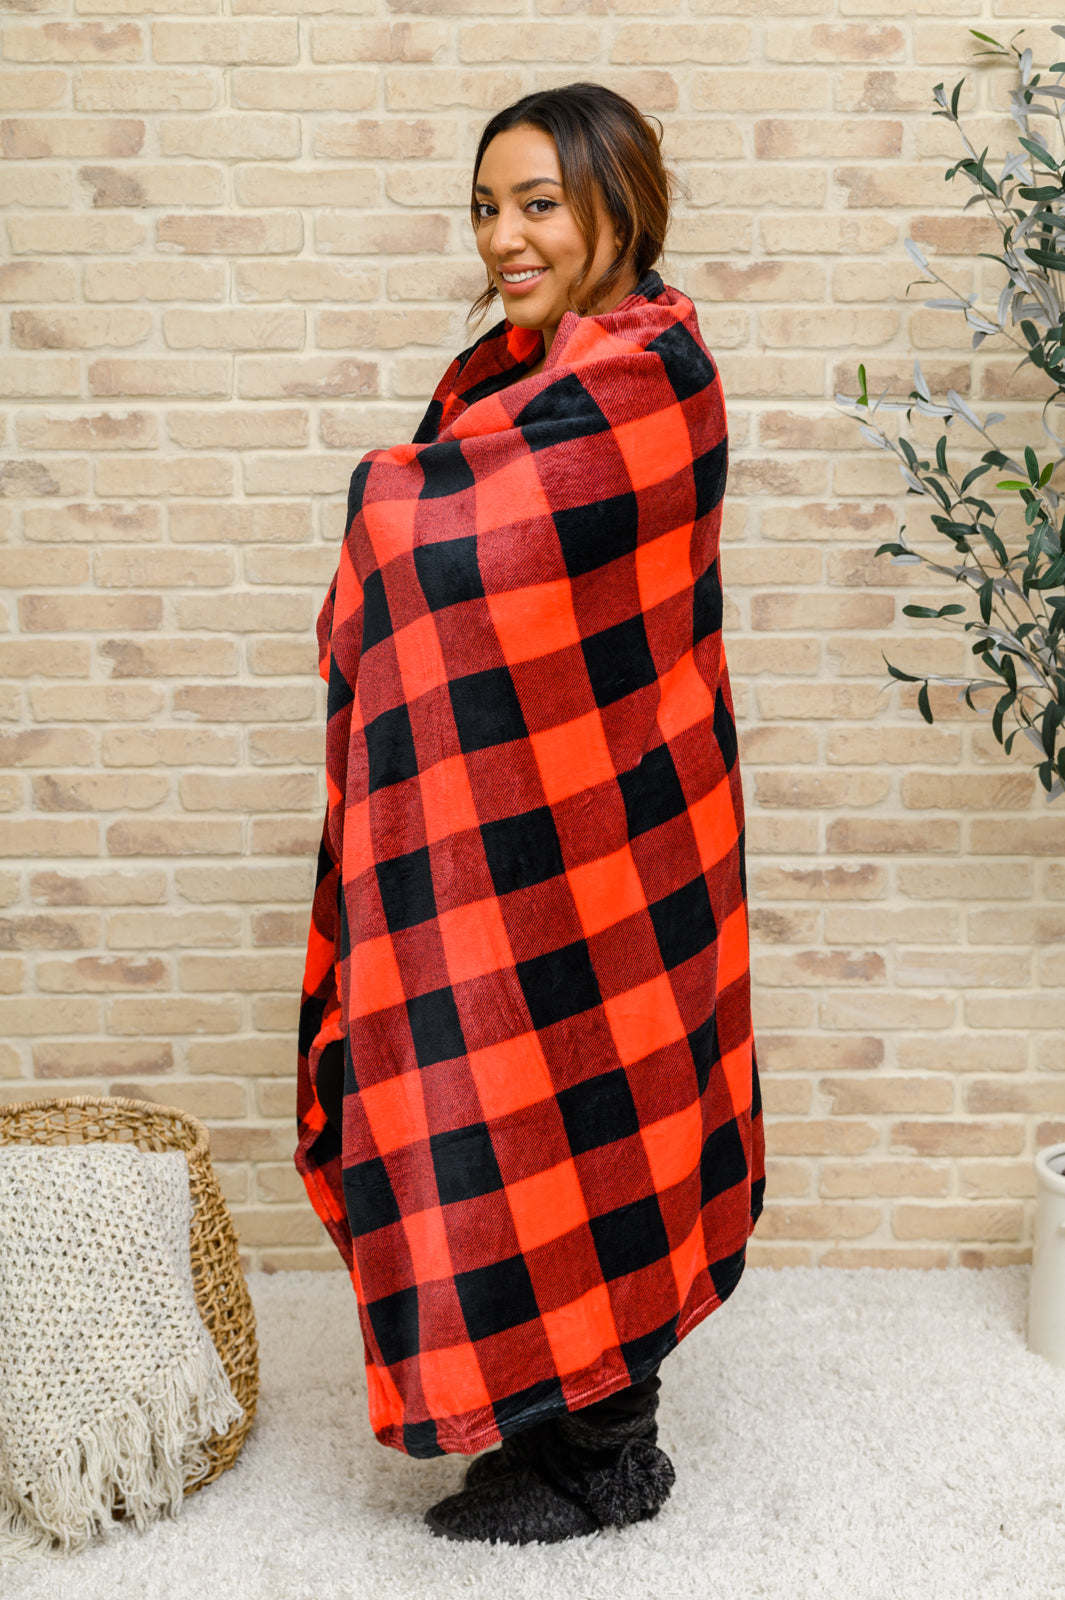 Spending our nights on the couch snuggled up with the Buffalo Plaid Blanket In Red & BlackThis cozy blanket features a red and black buffalo plaid design made from an ultra soft fleece.